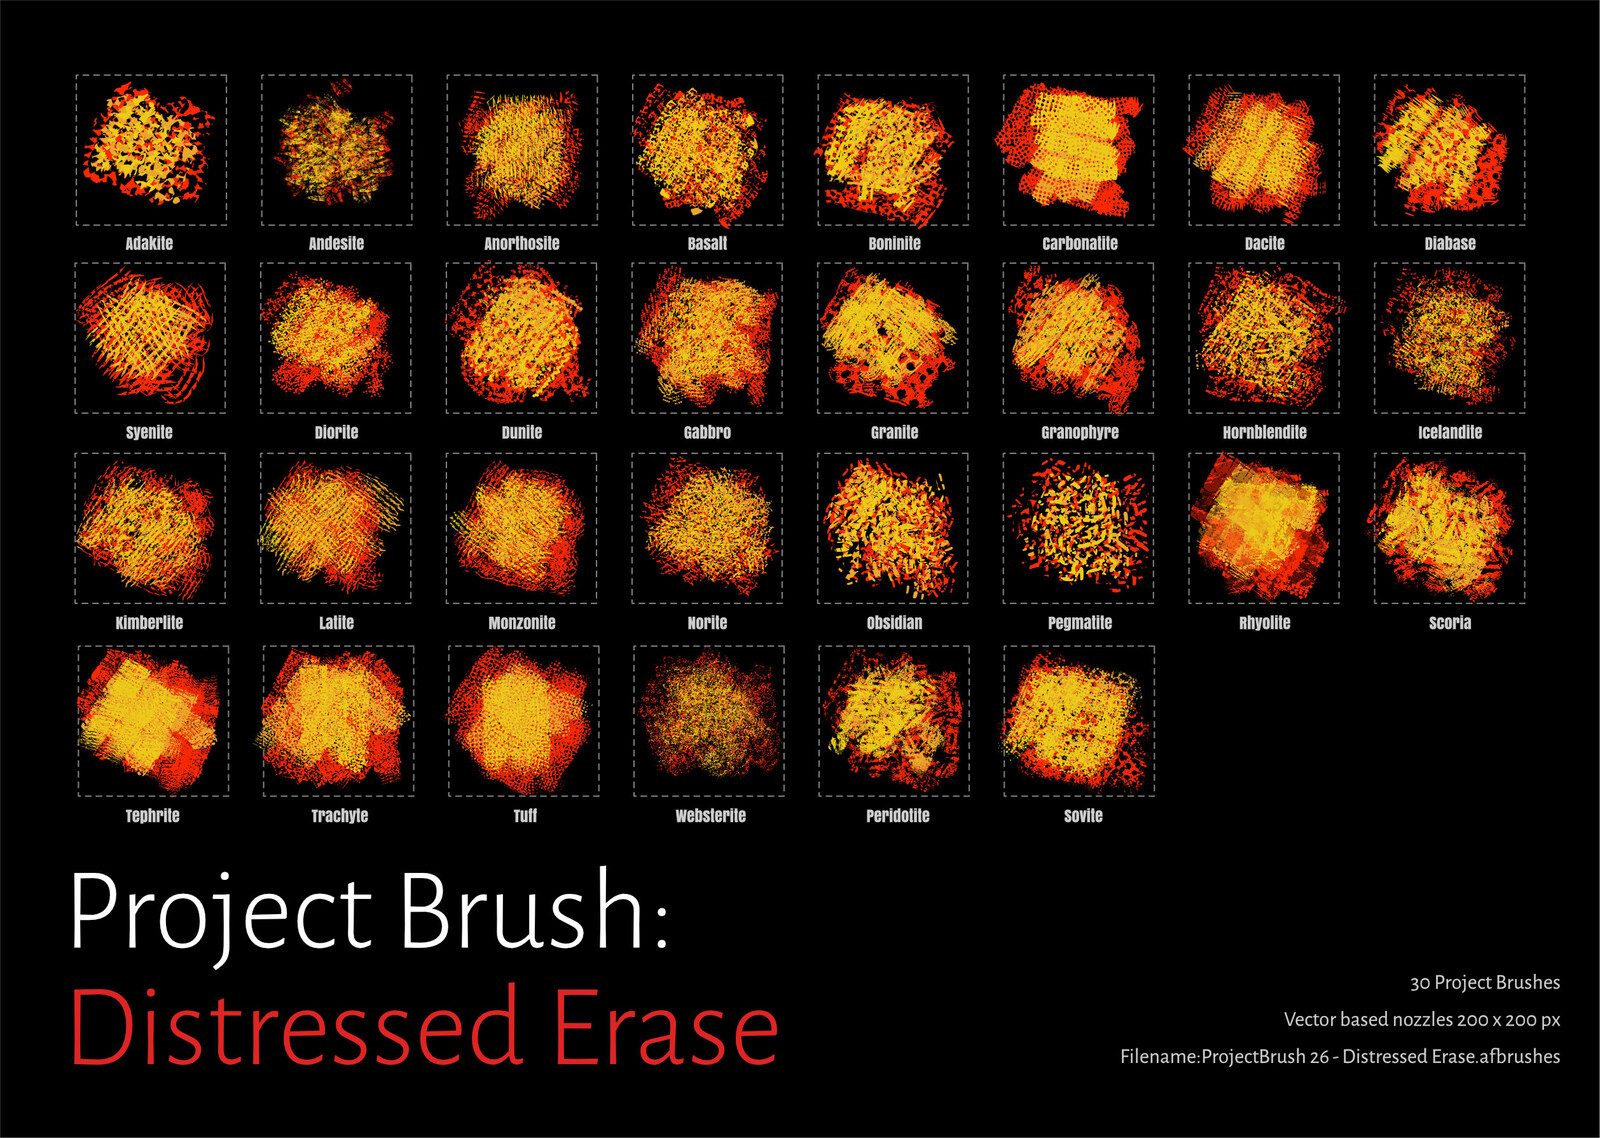 Project Brush 26: Distressed Erase